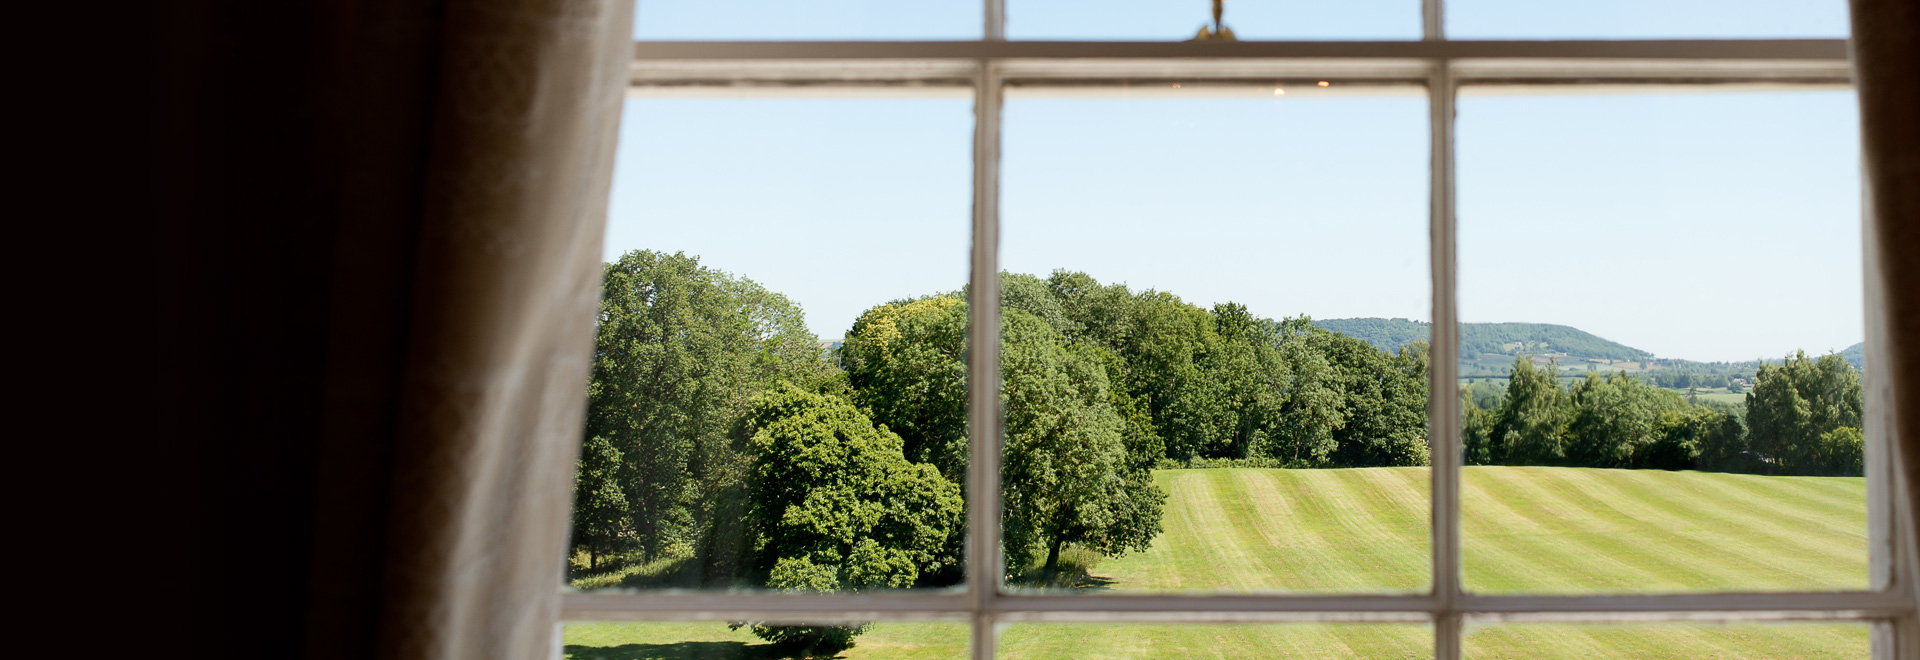 Room with a view over the surrounding Herefordshire countryside - Russell Lewis Photography